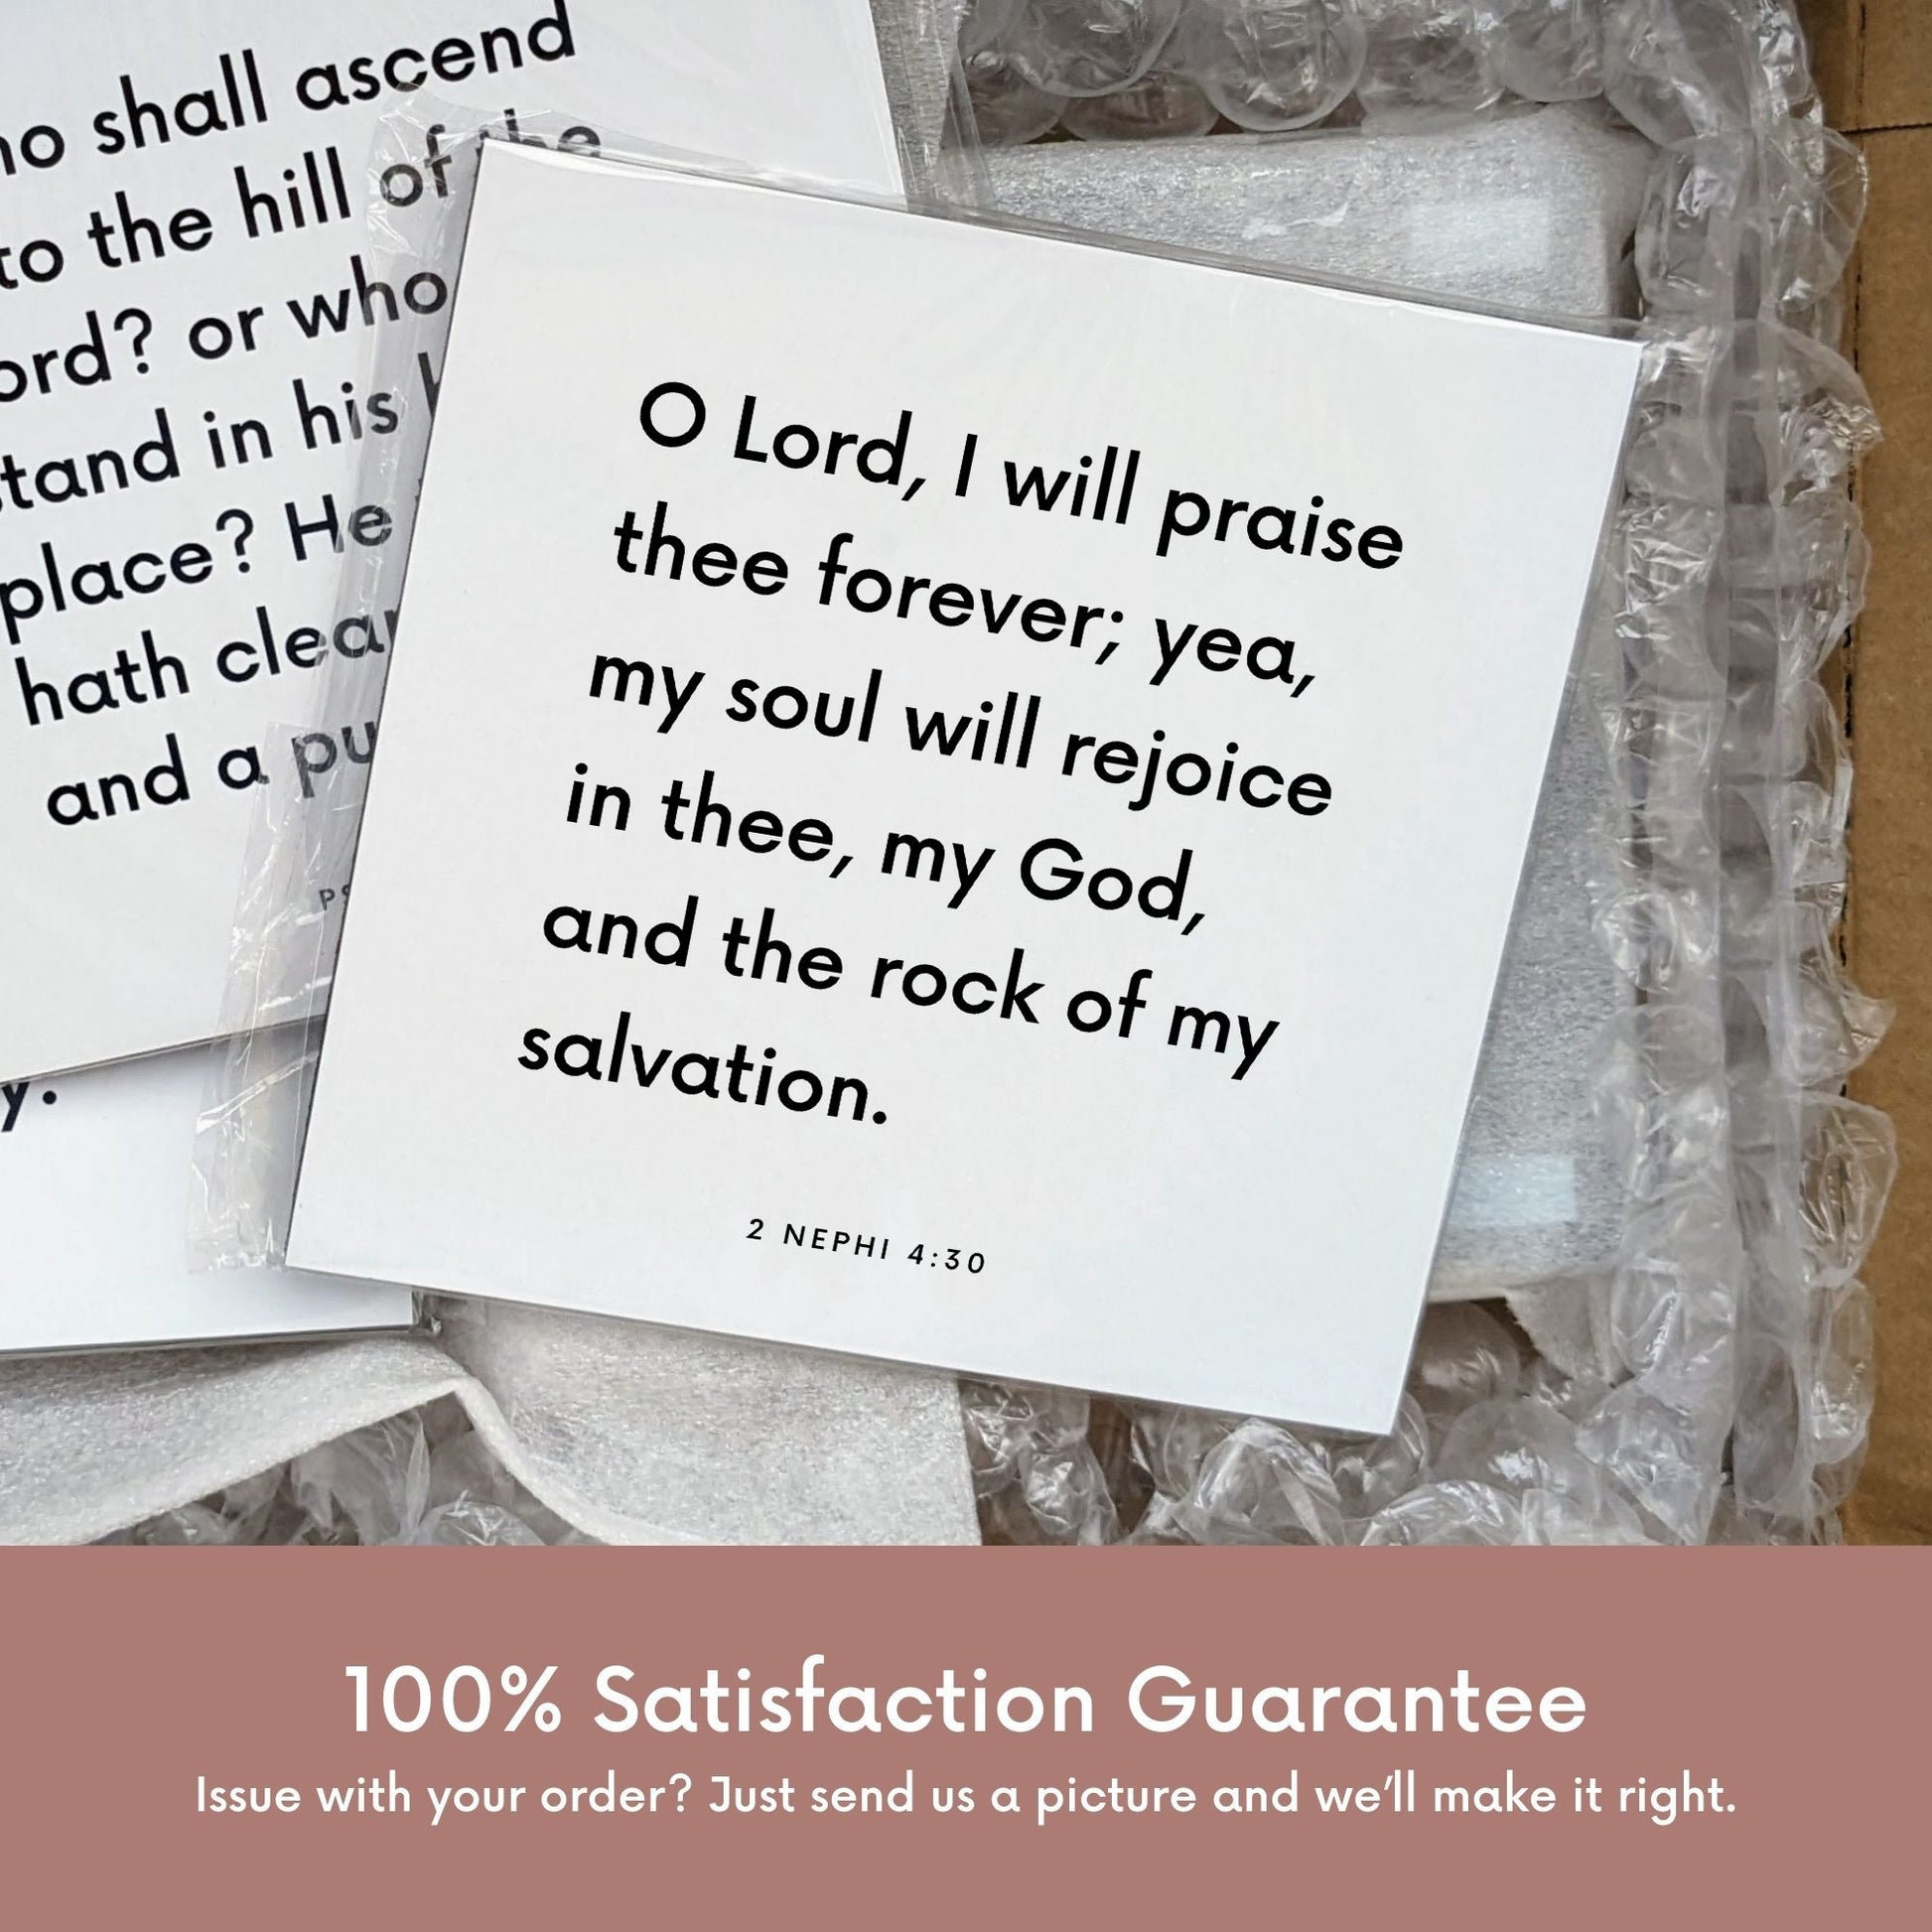 Shipping materials for scripture tile of 2 Nephi 4:30 - "Lord, I will praise thee forever"